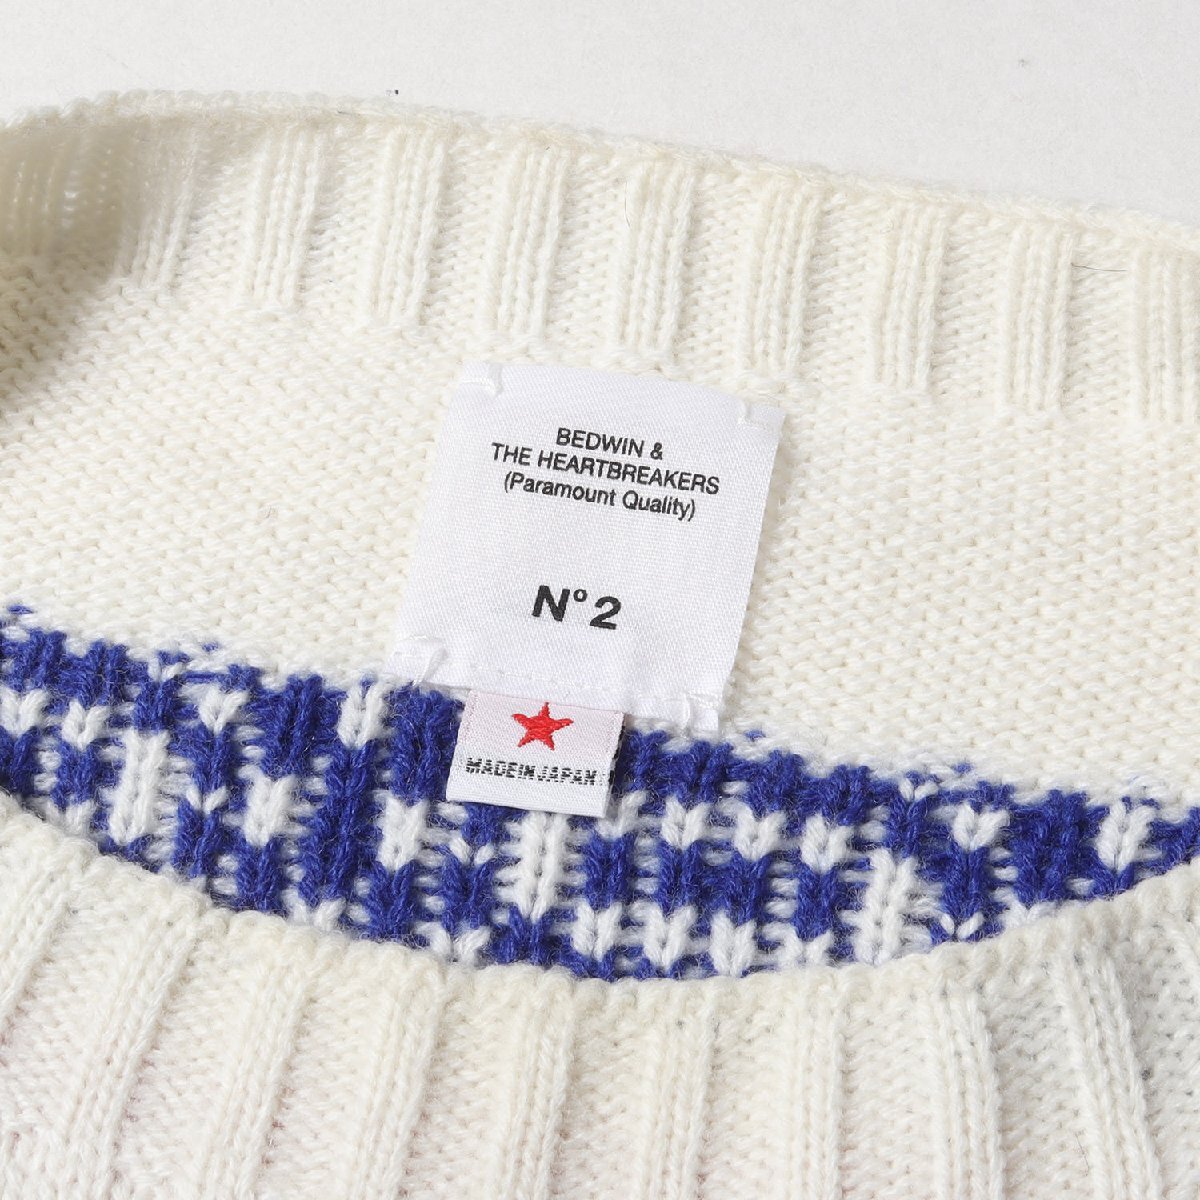 BEDWINbedo wing knitted size :2 17AW crew neck nordic knitted sweater C-NECK NORDIC SWEATER DANNY navy navy blue 